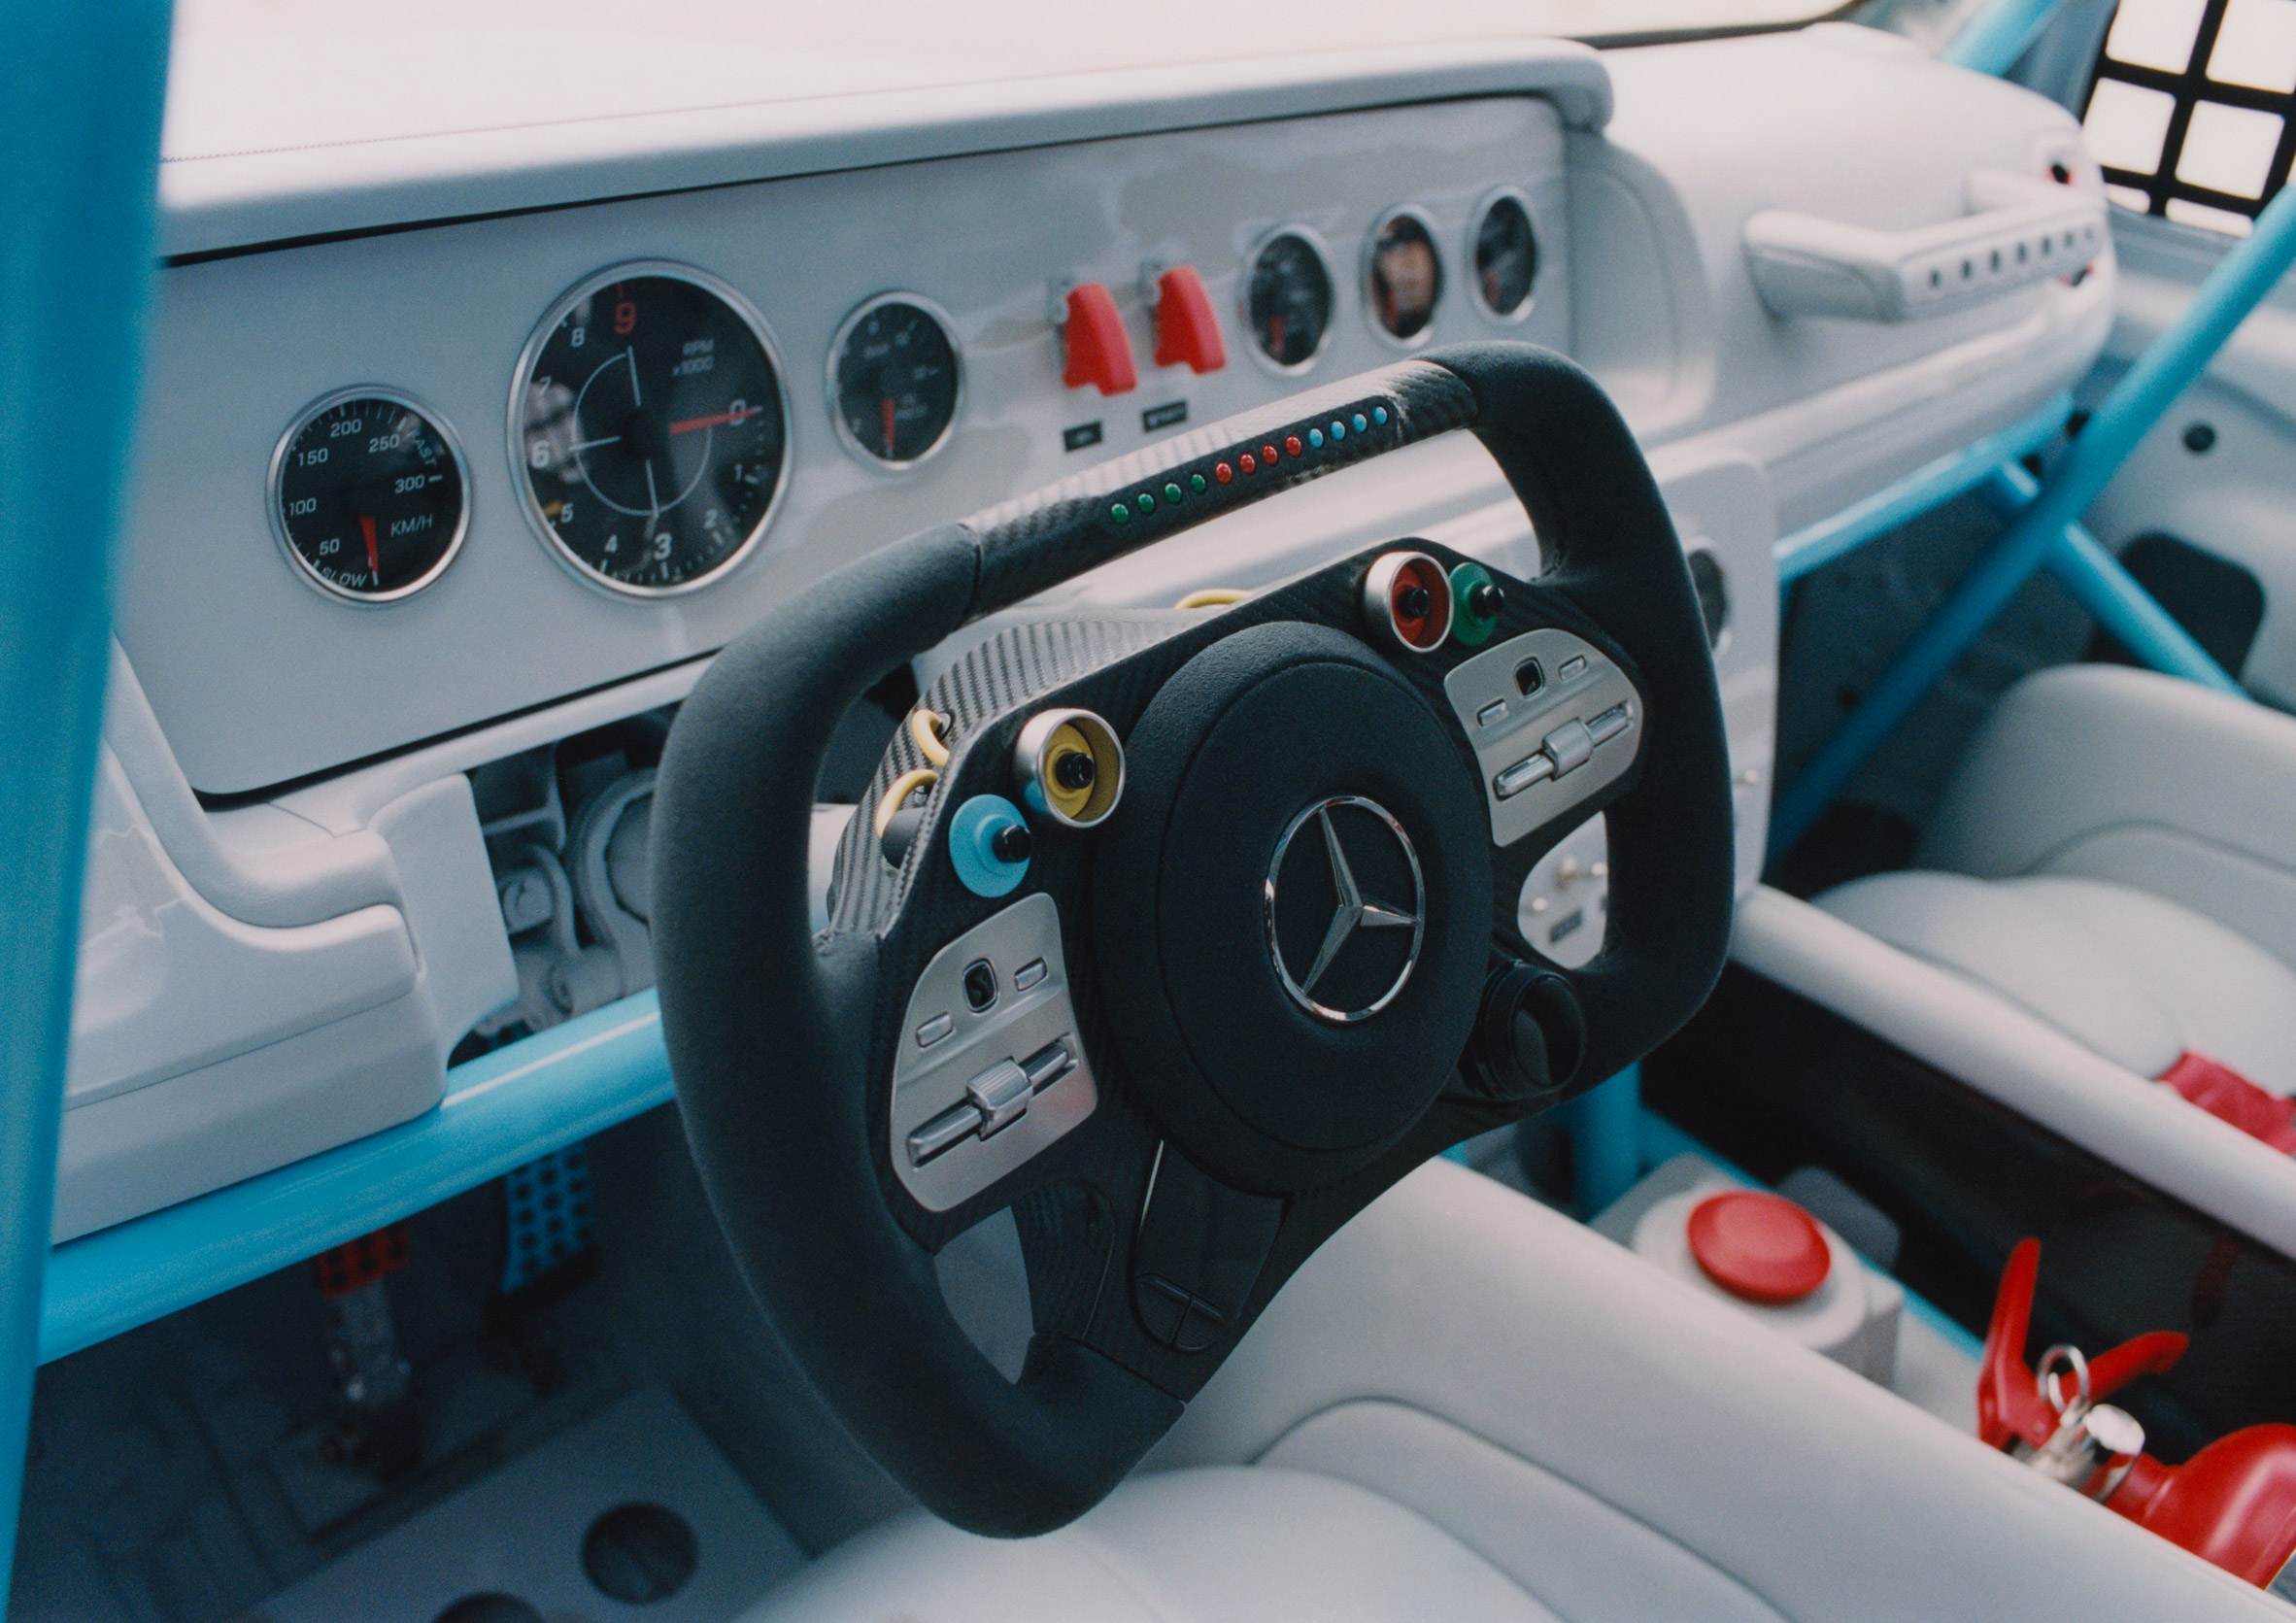 Dashboard and wheel of Project Geländewagen car by Virgil Abloh and Mercedes Benz